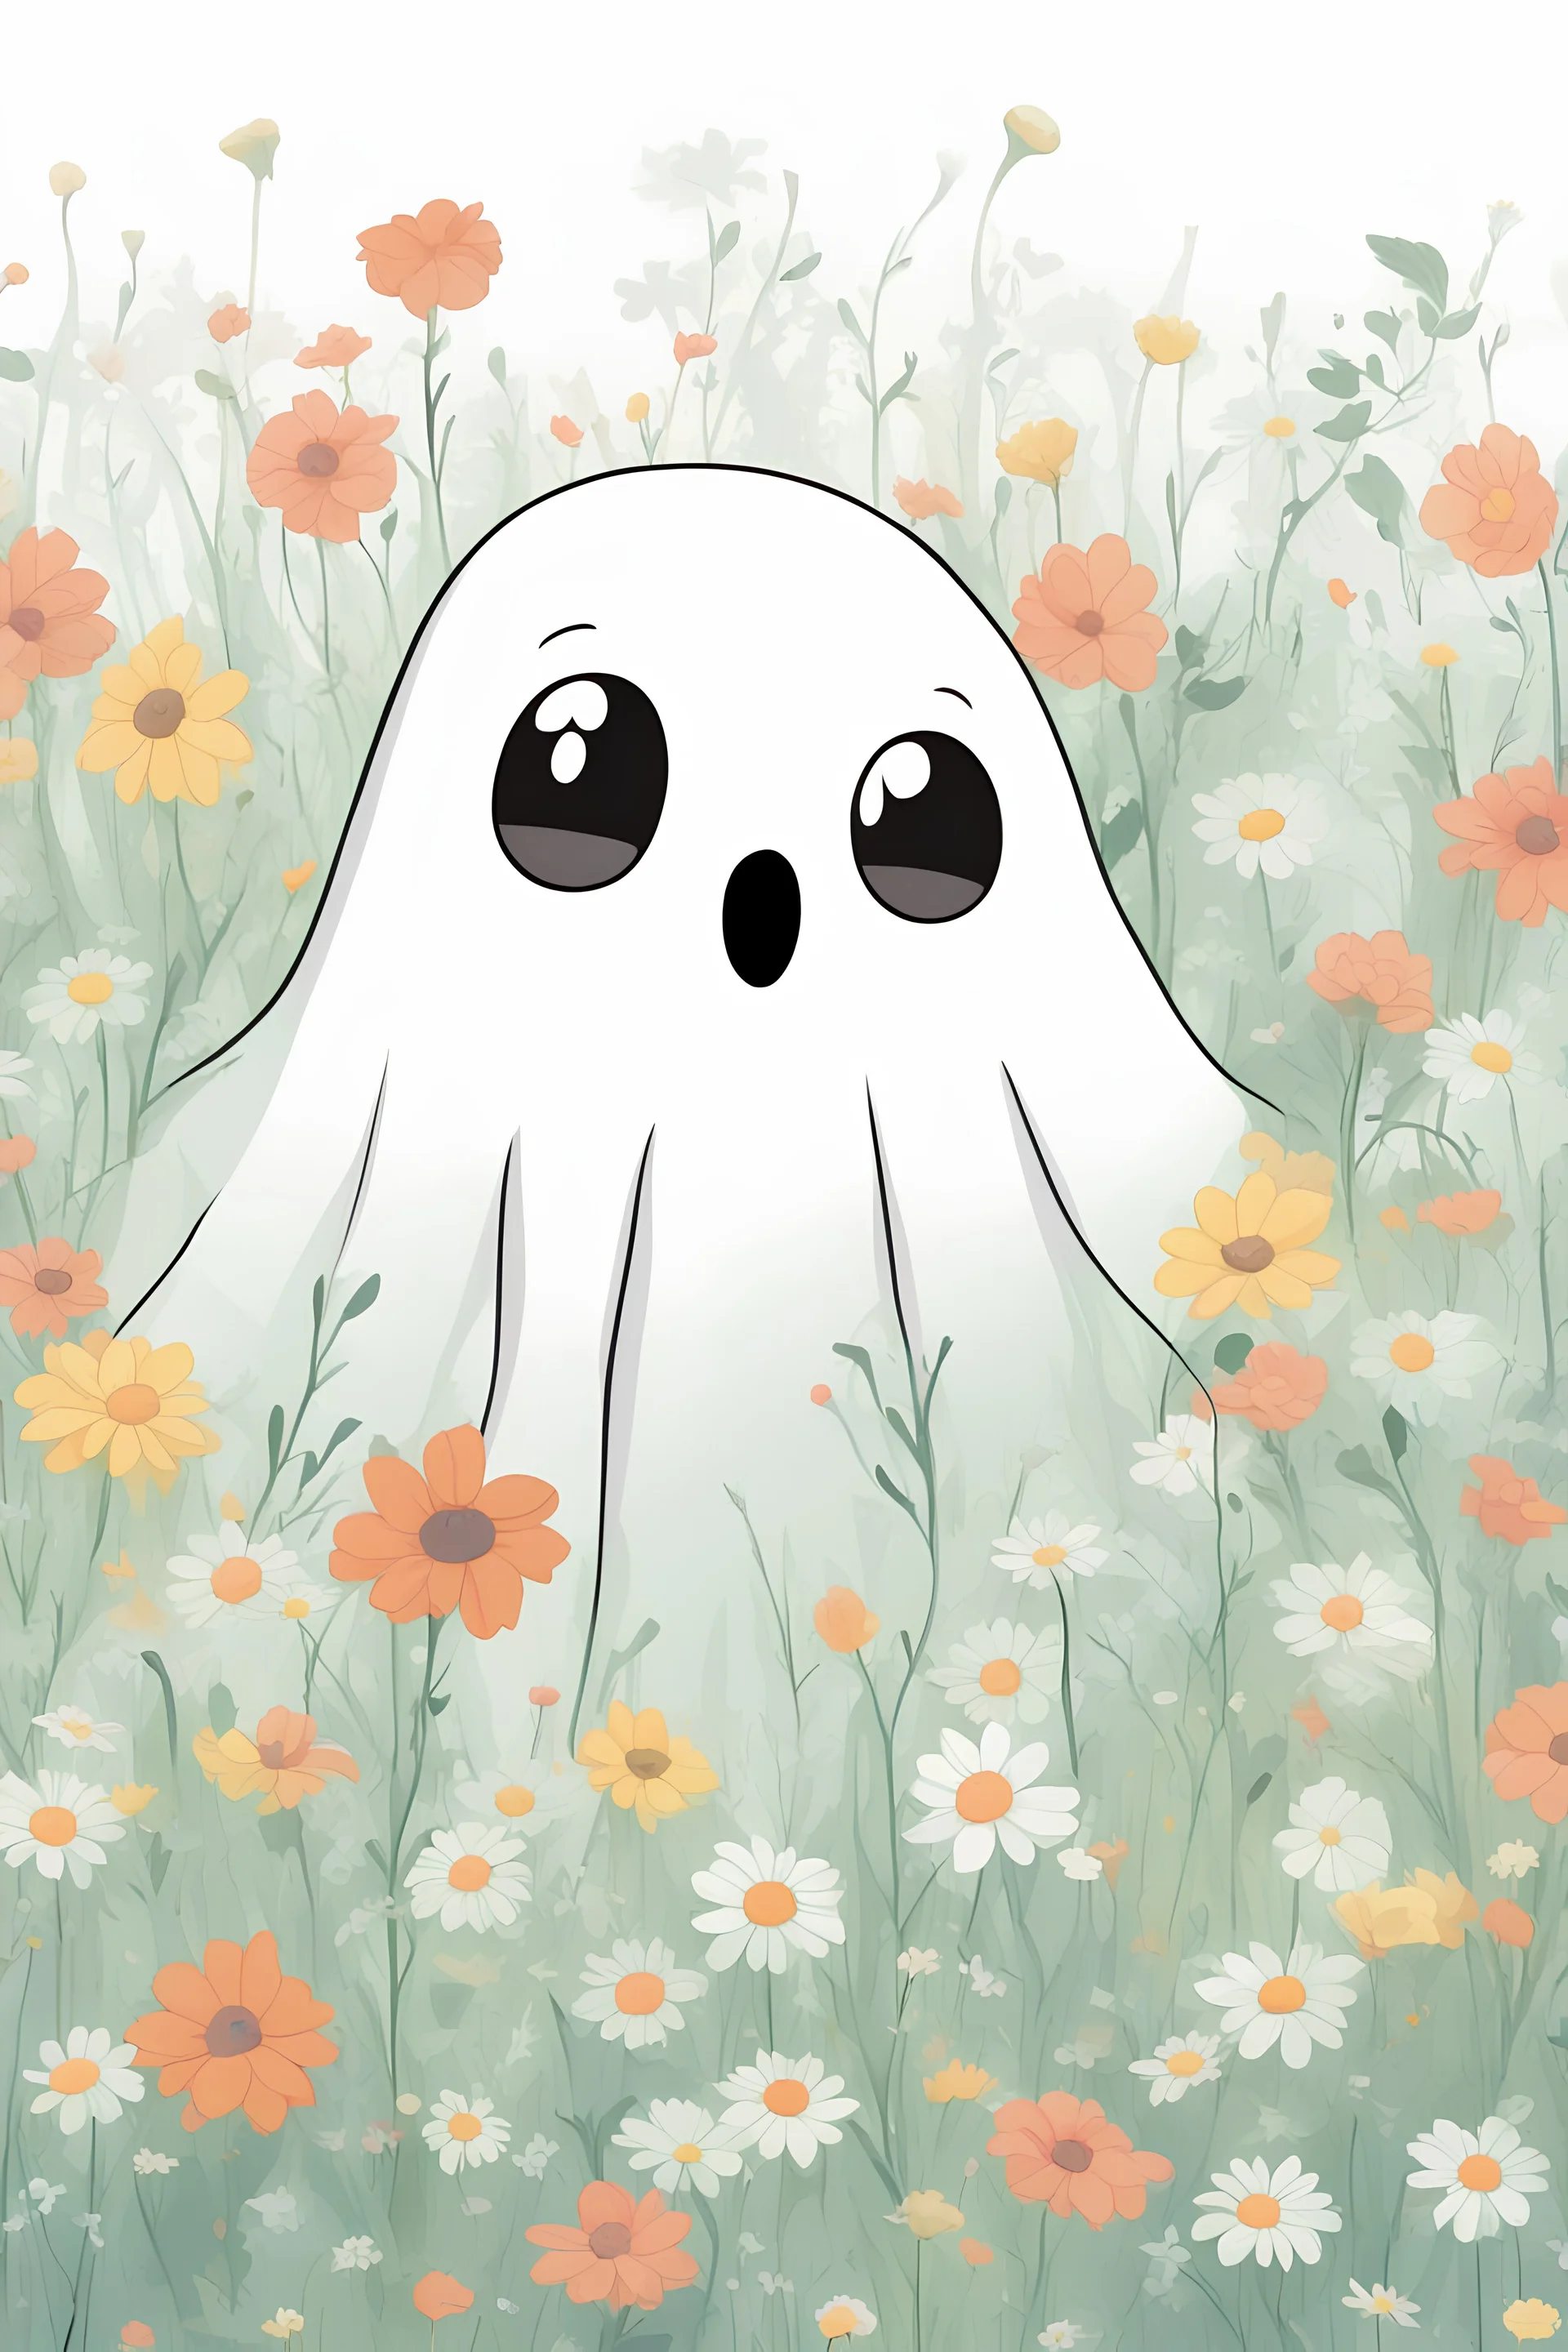 Cute Ghost on a Flower Meadow, floral, ghost